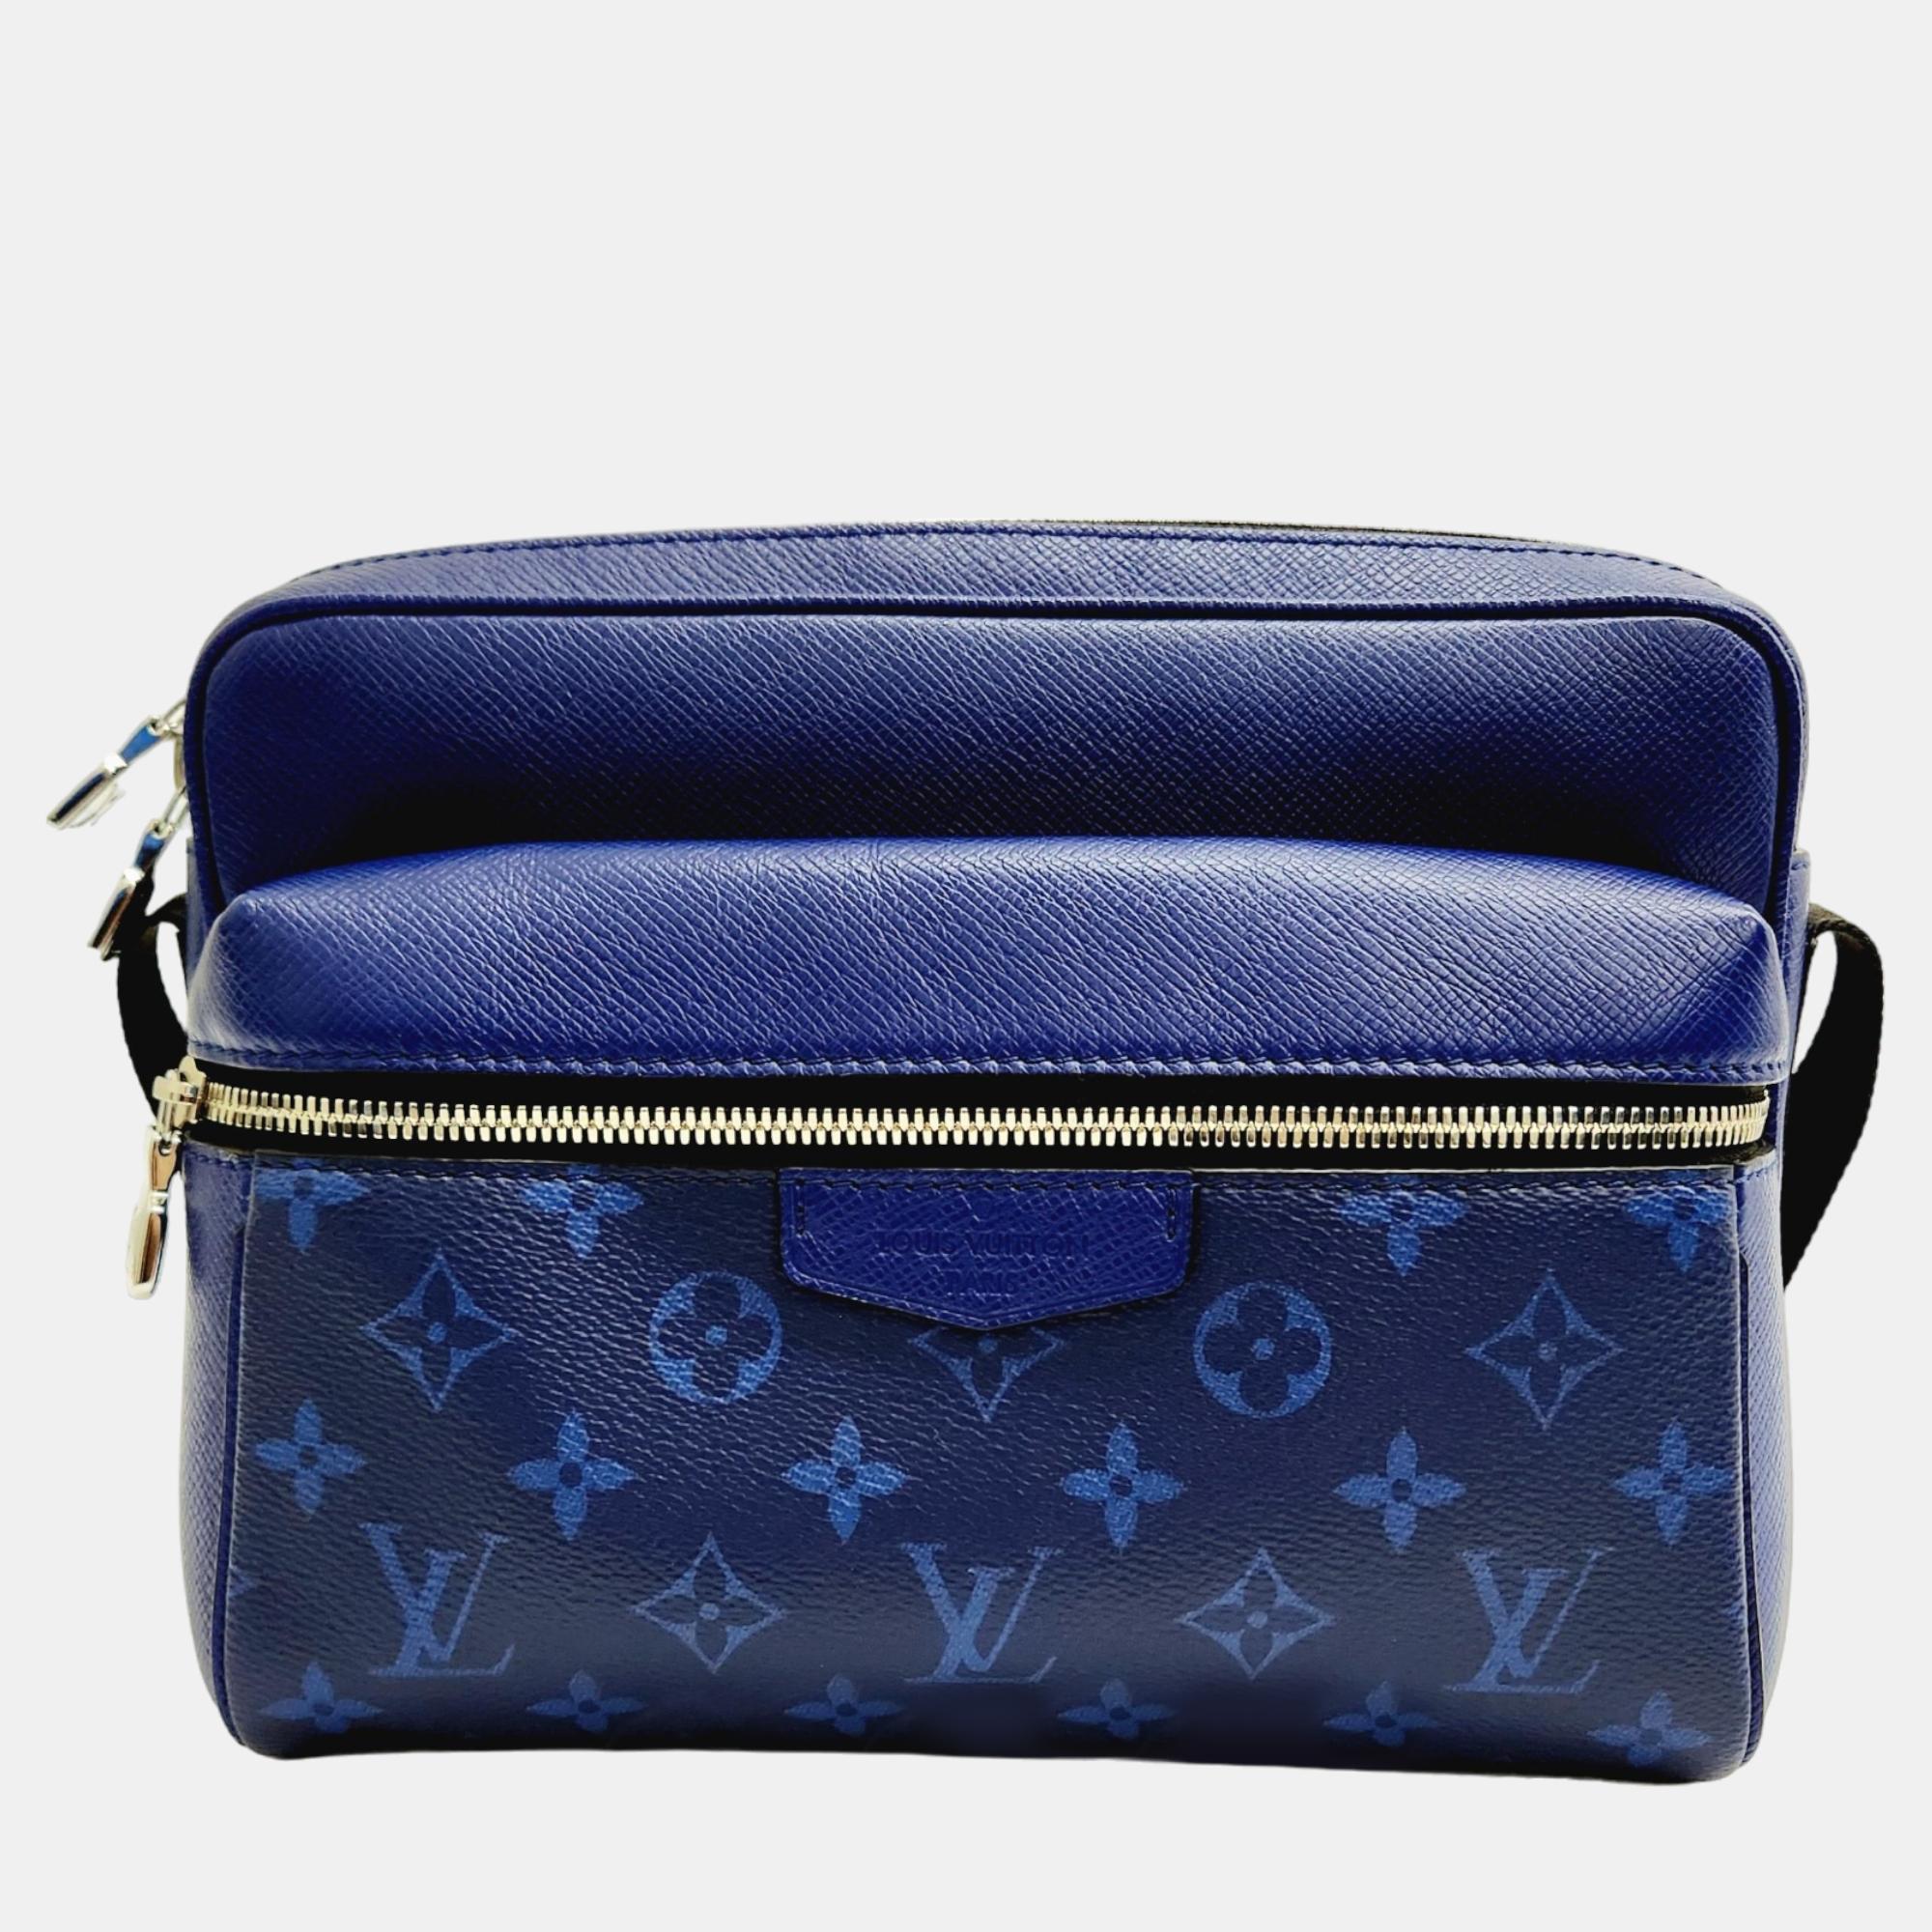 A classic handbag comes with the promise of enduring appeal boosting your style time and again. This LV bag is one such creation. It's a fine purchase.